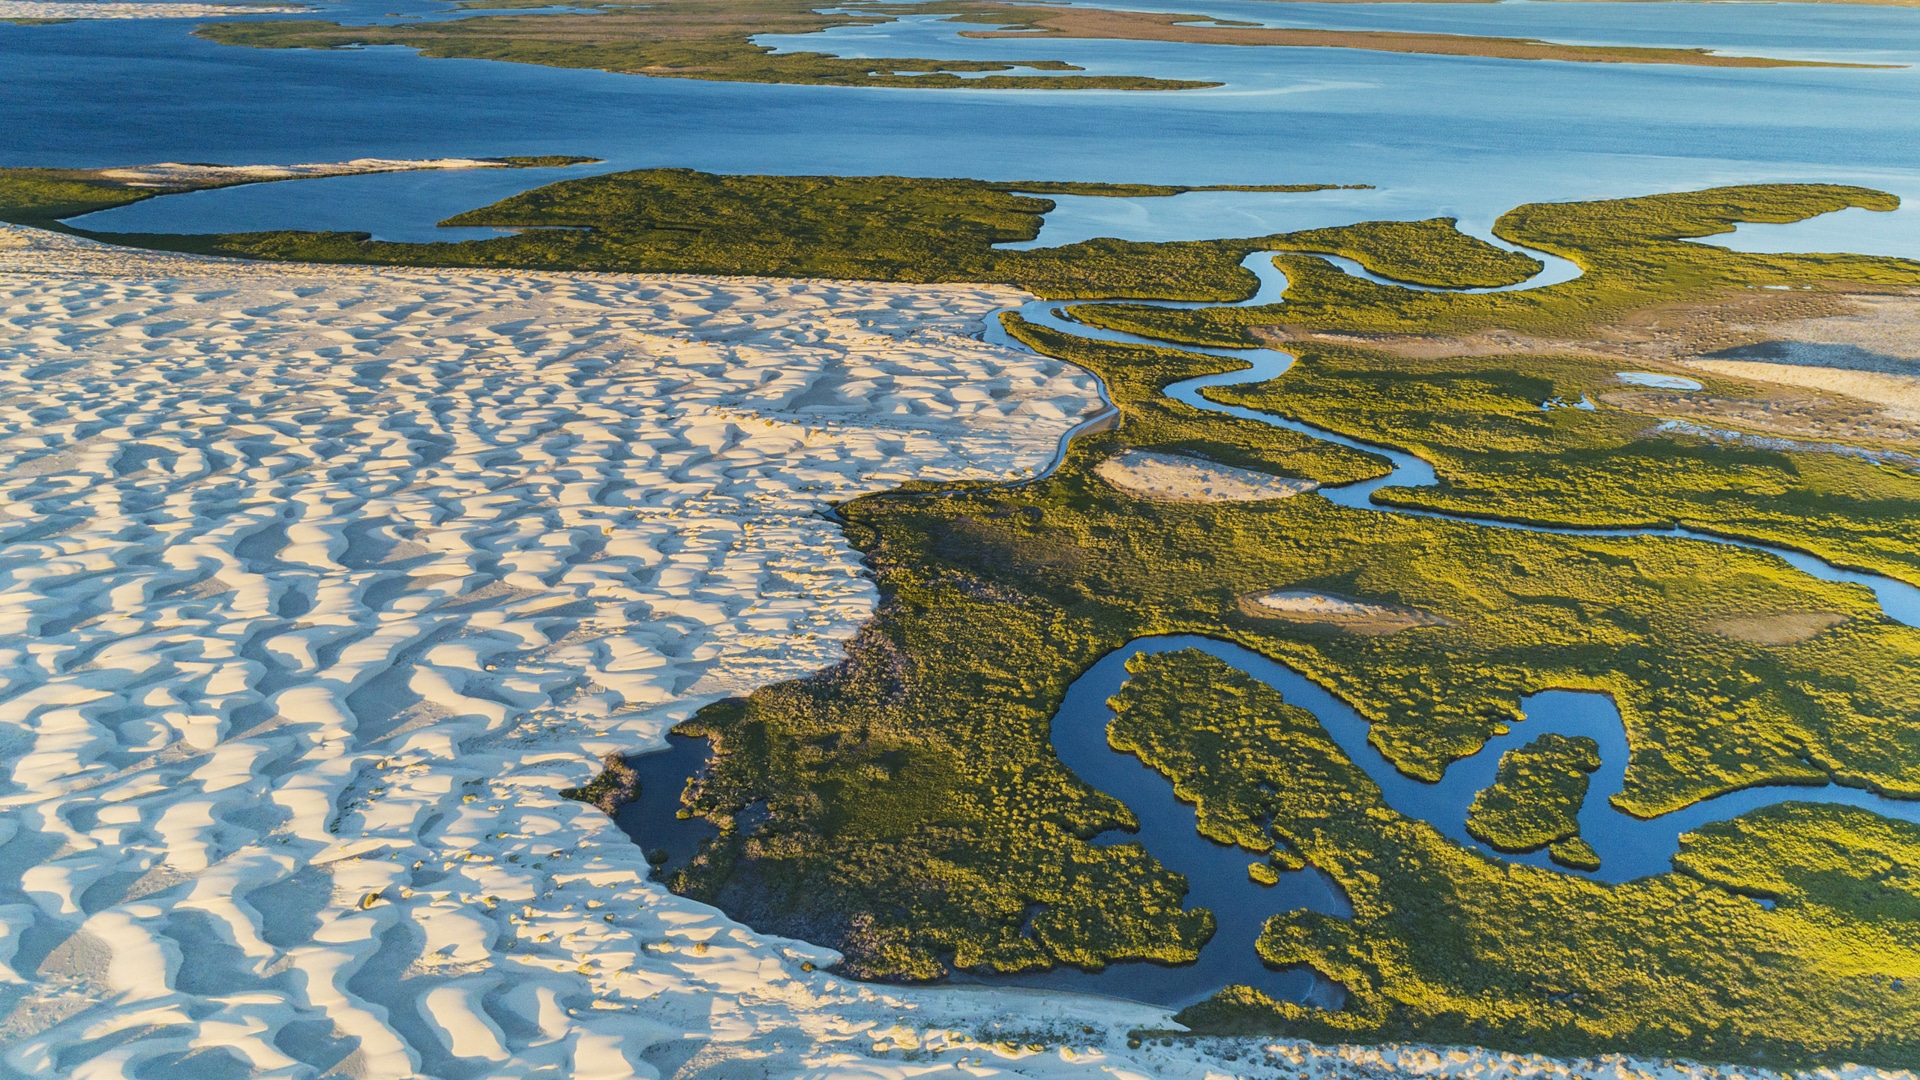 Mangroves and Sand Dunes in the Gulf of California